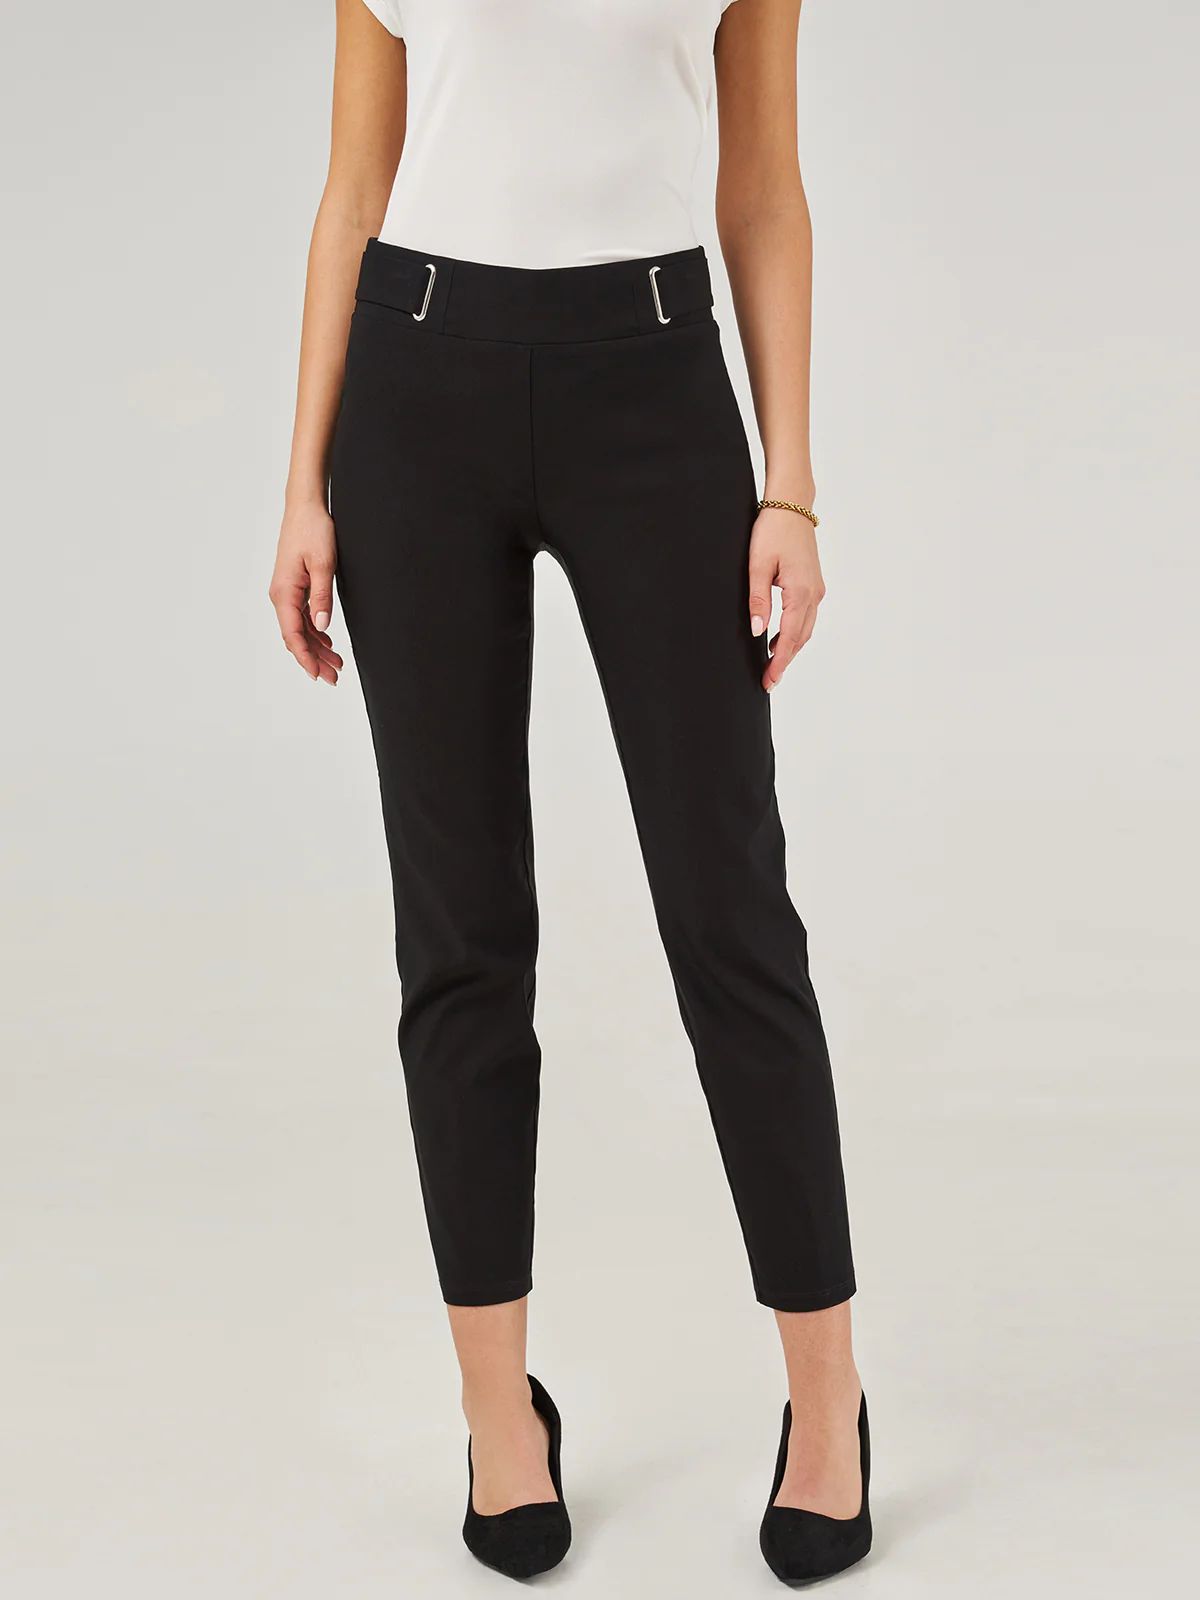 Luxe Stretch Millennium Paperclip Grommet Ankle Pants | 89th + Madison